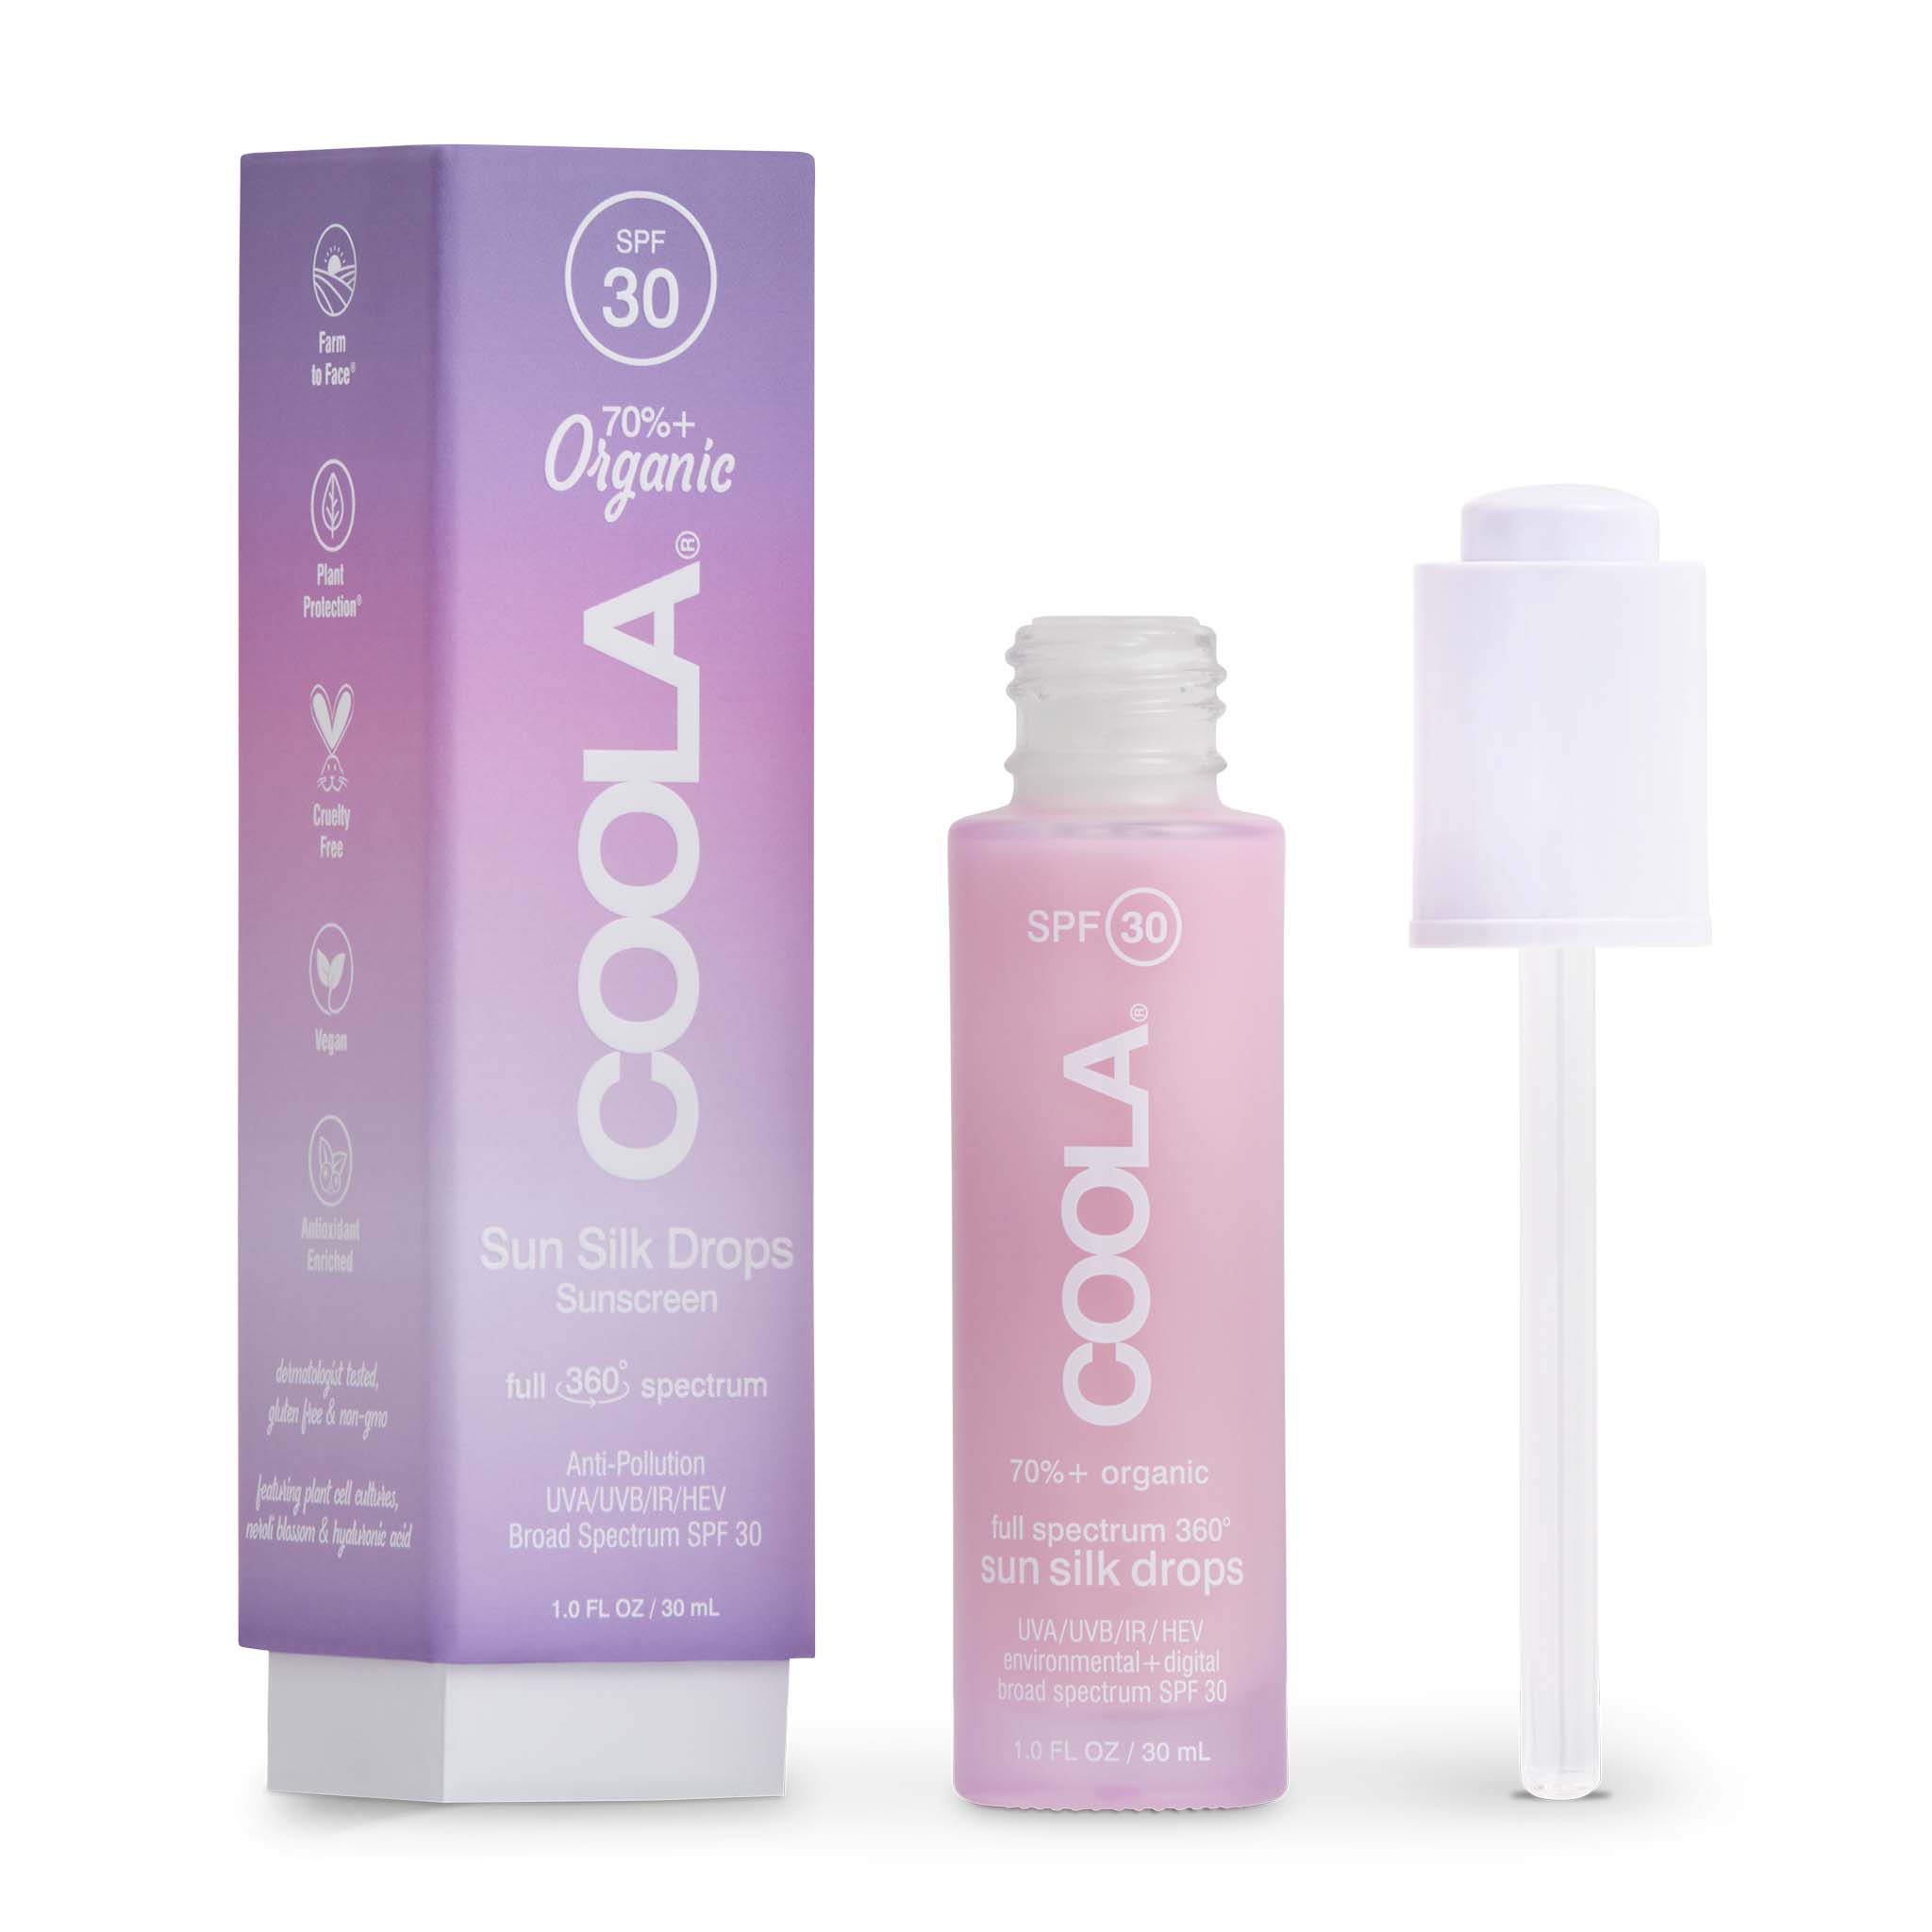 Coola face spf 30 is a full spectrum sunscreen that protects not just from sun rays but from blue light on your electronic devices. 